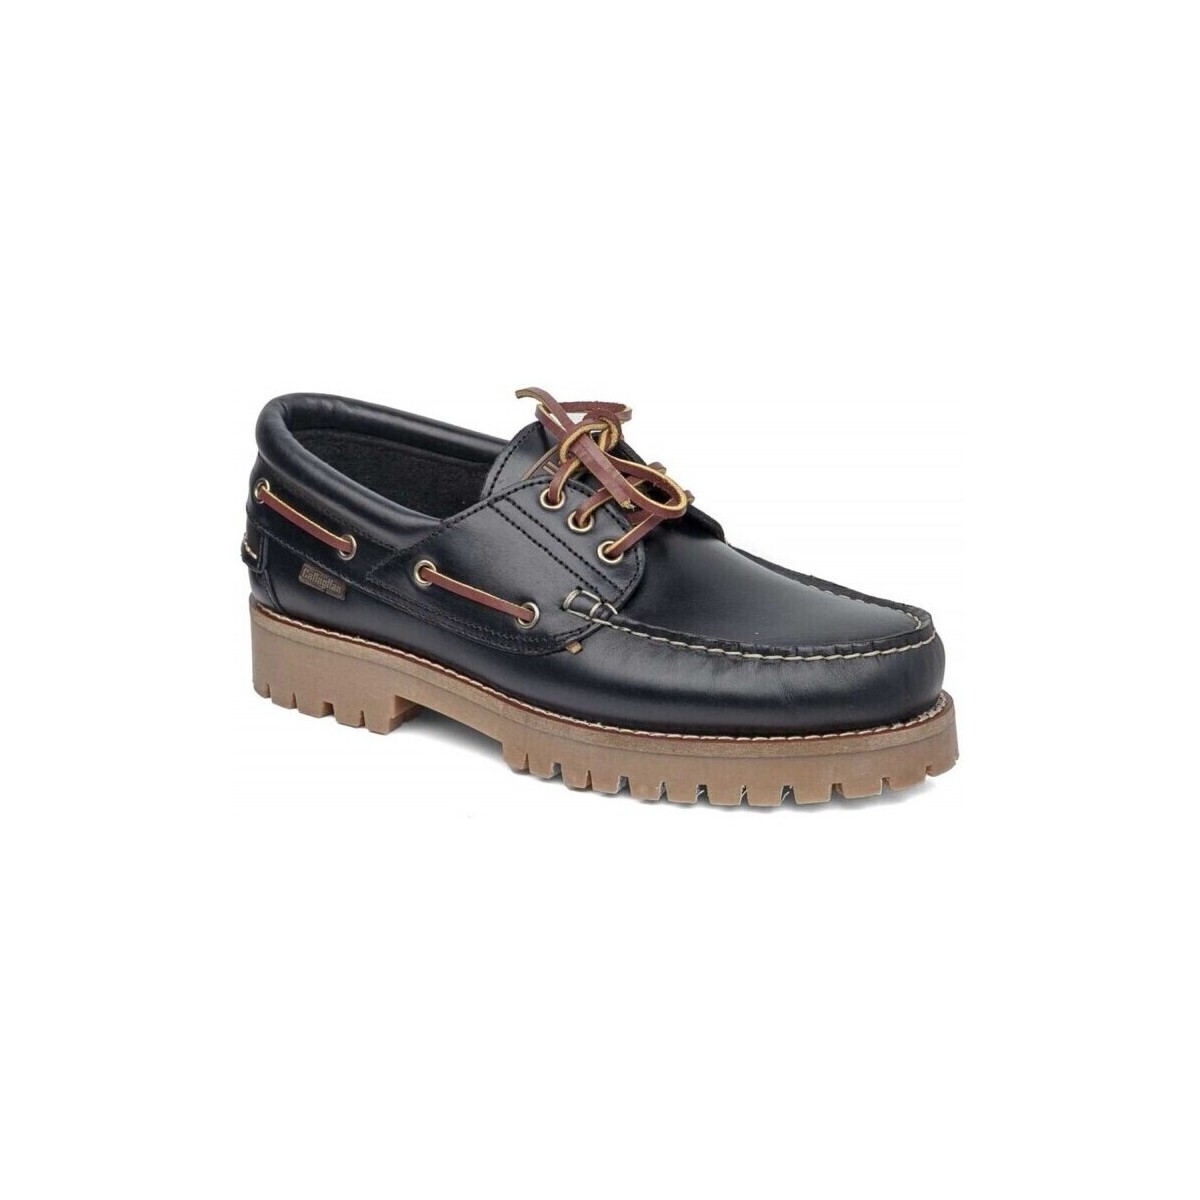 Boat shoes CallagHan 24150-24